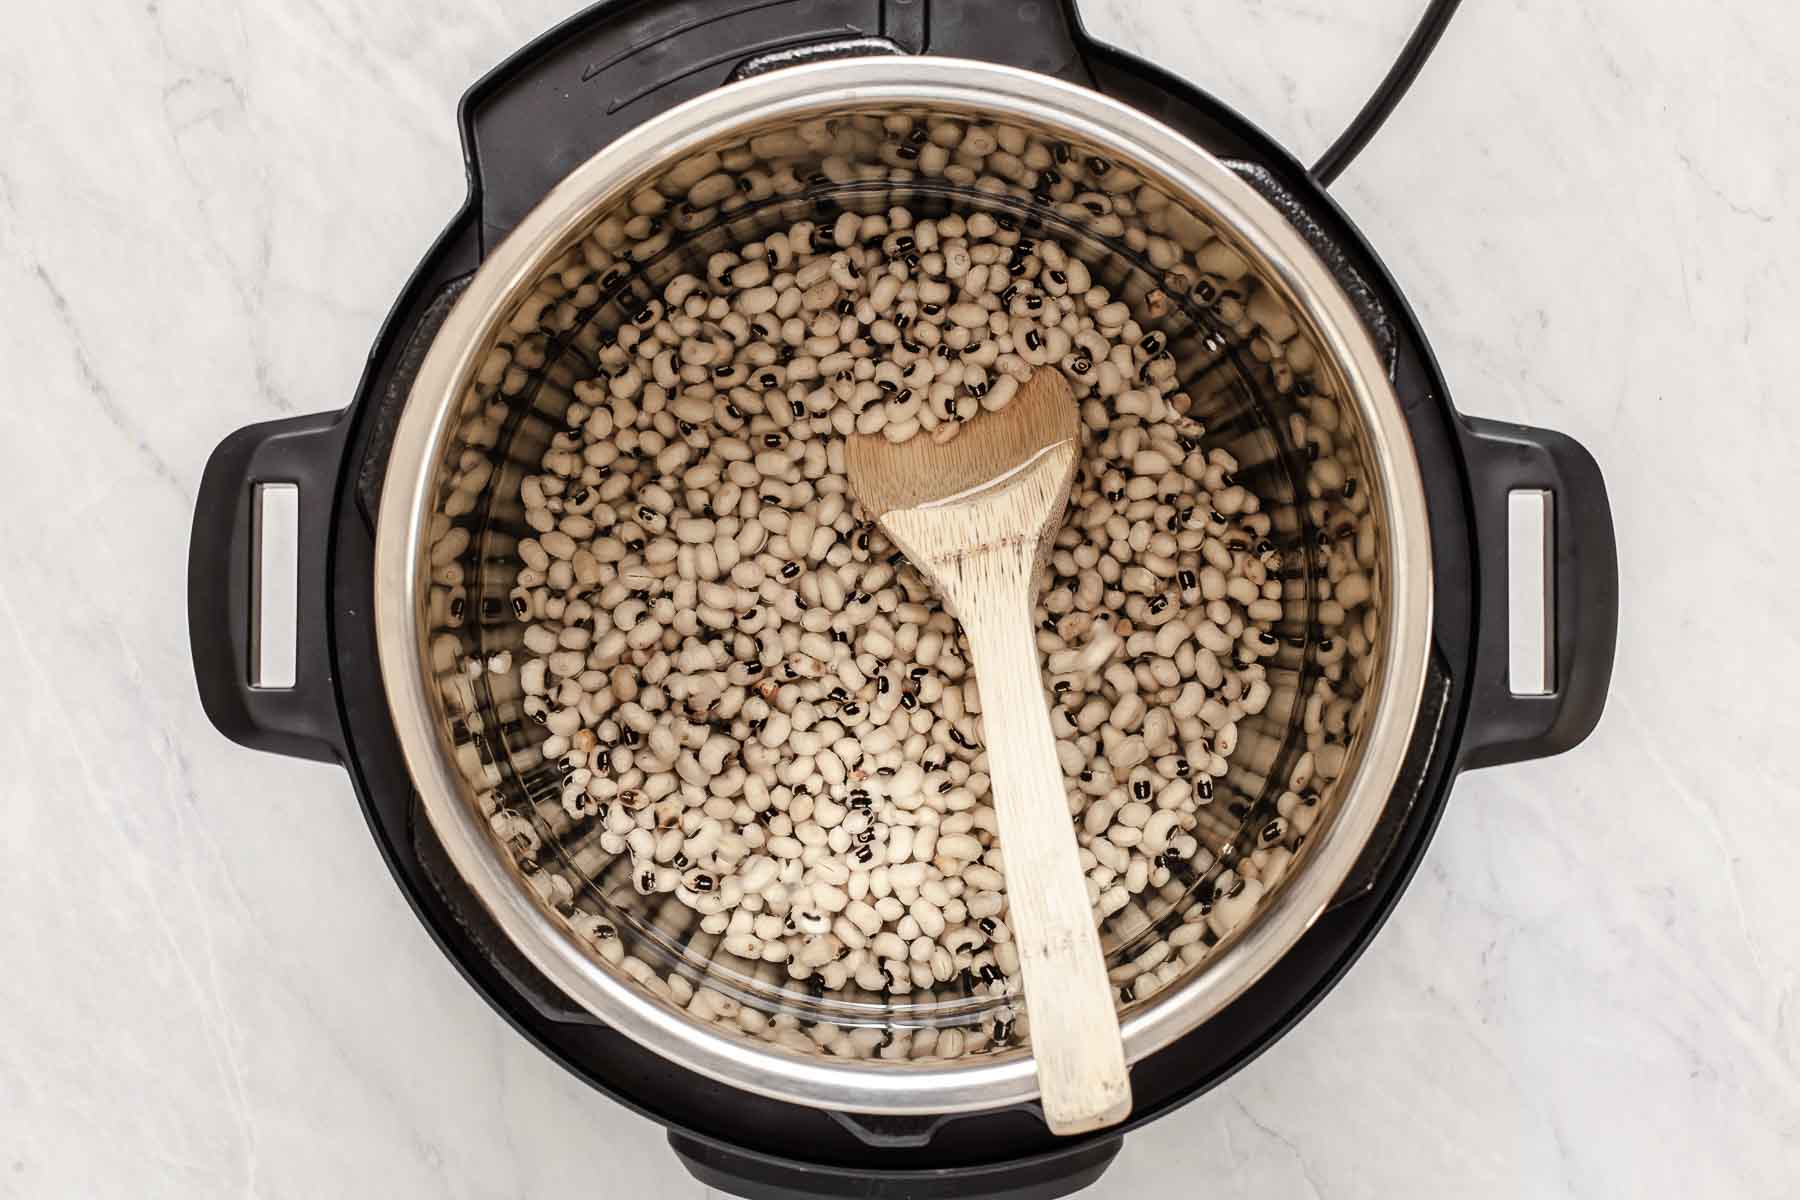 How To Cook Black-Eyed Peas In An Electric Pressure Cooker